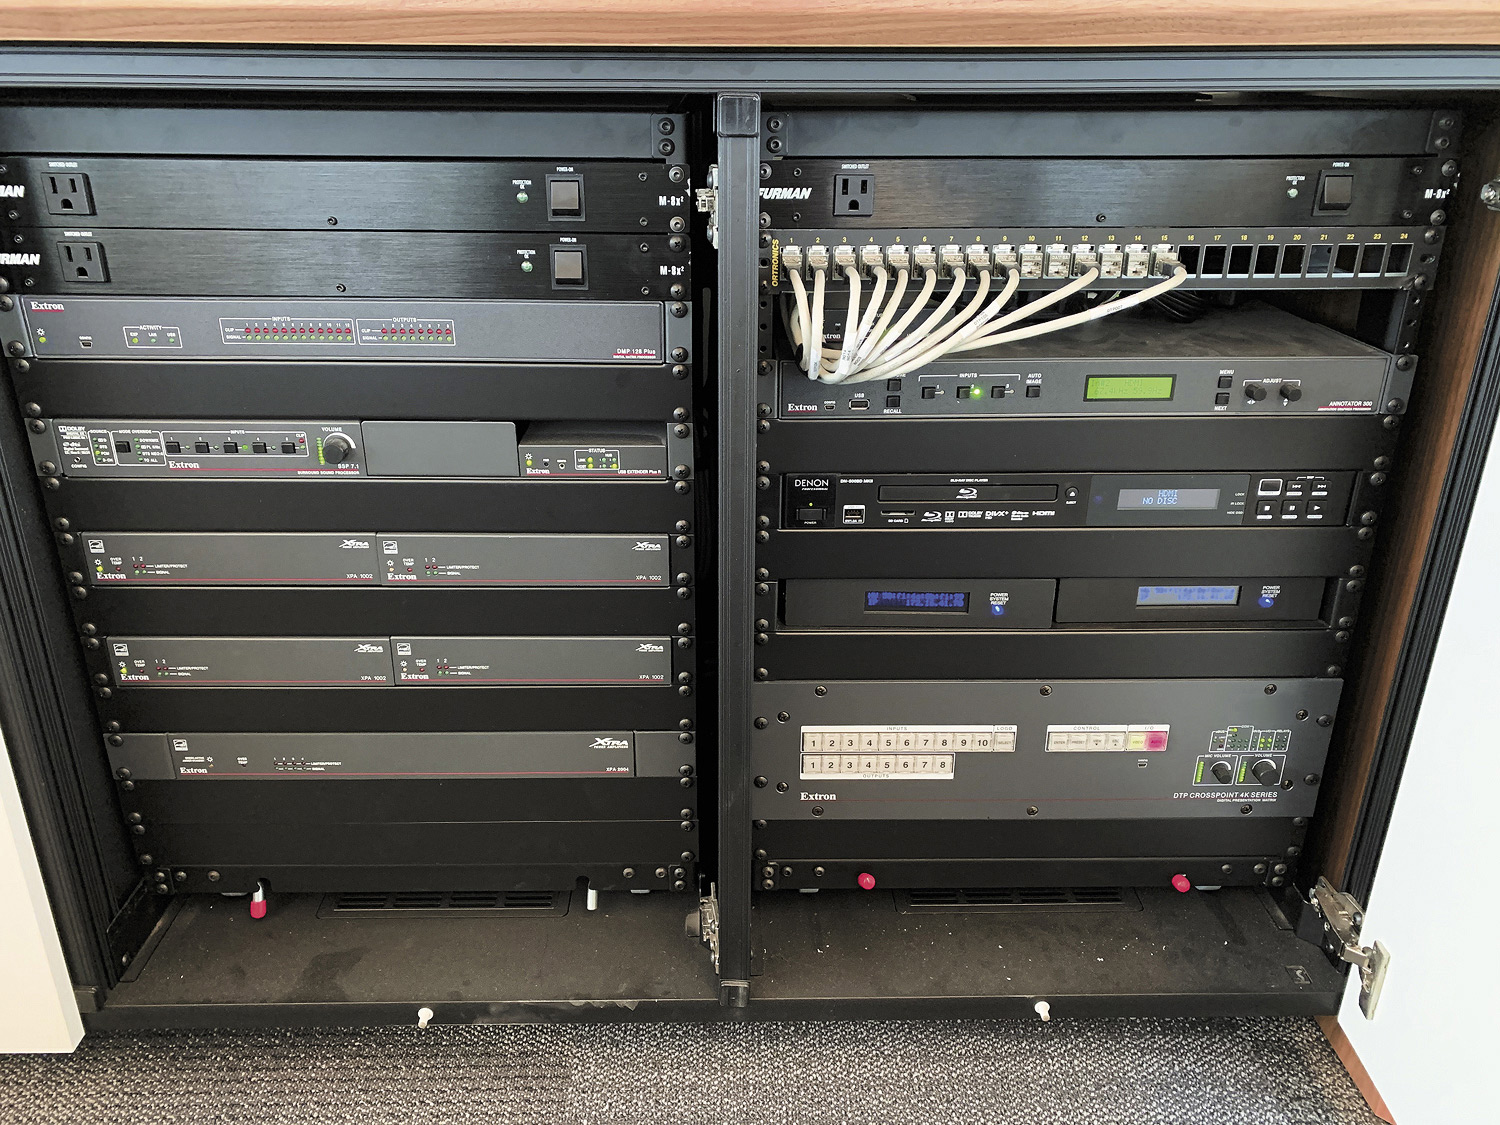 The classroom credenza holds the local sources, along with various Extron audio, video, and control components such as the DTP CrossPoint 4K presentation matrix switcher